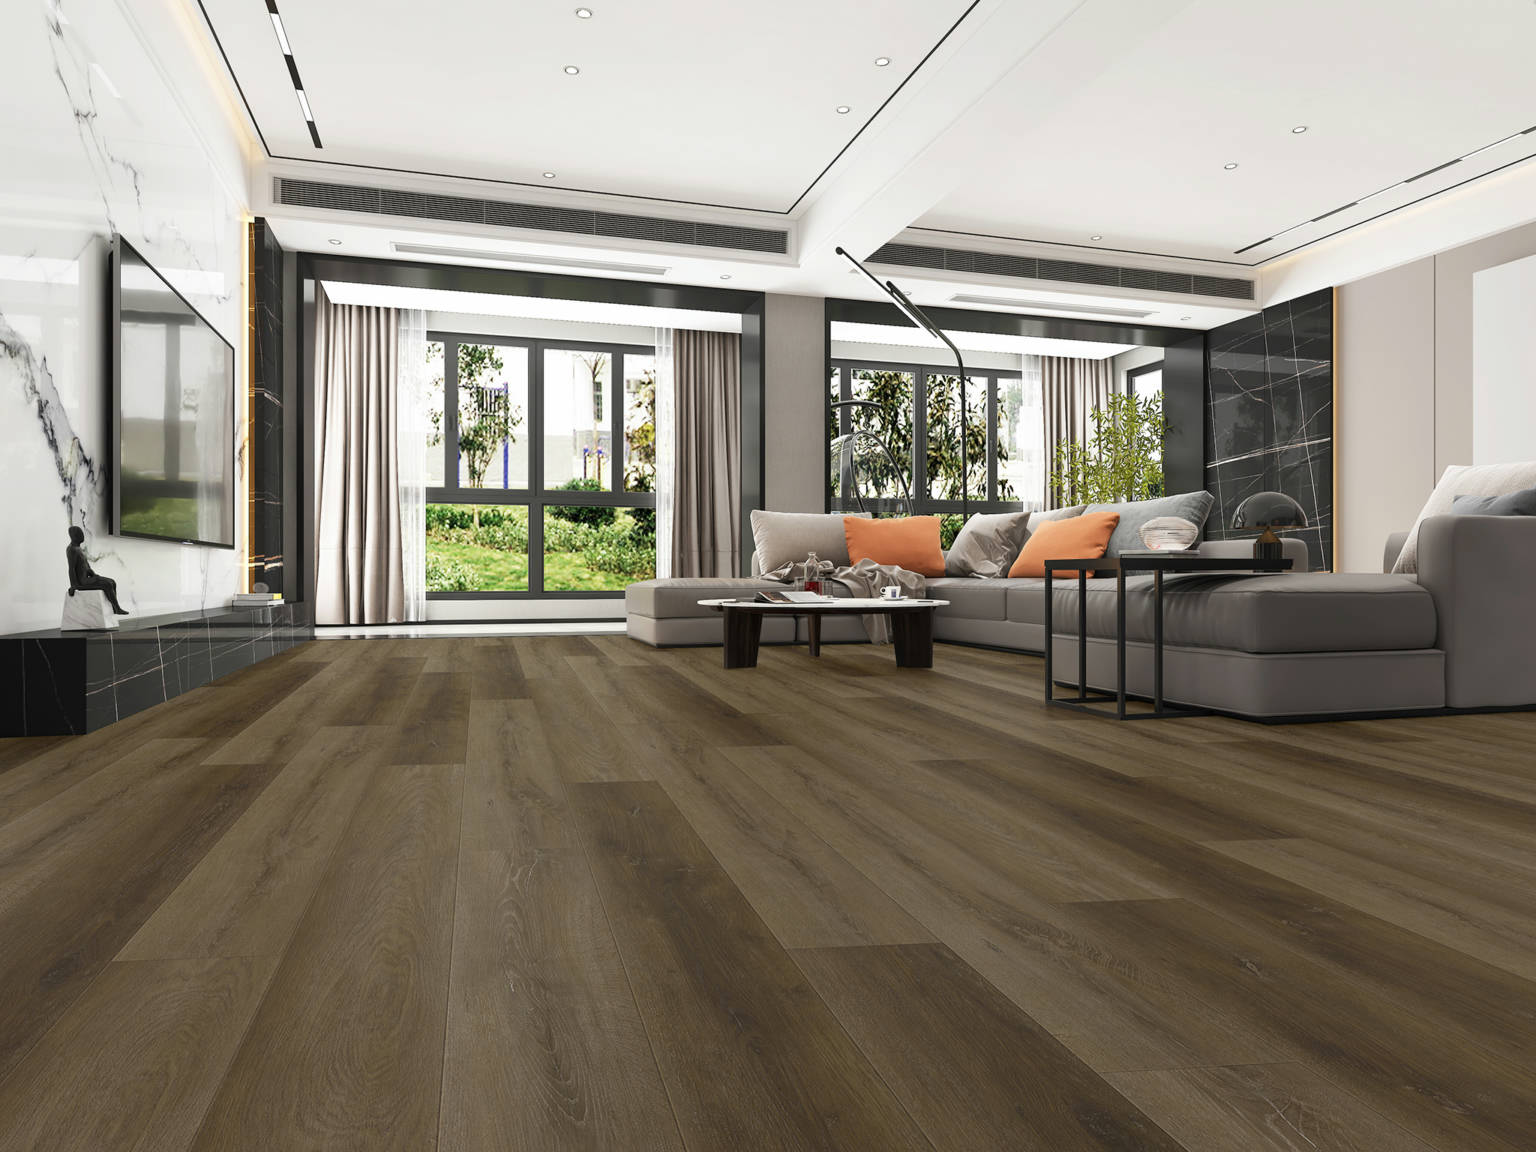 Timber Ridge Gold 20 1 | Qualis Ceramica | Luxury Tile and Vinyl at affordable prices